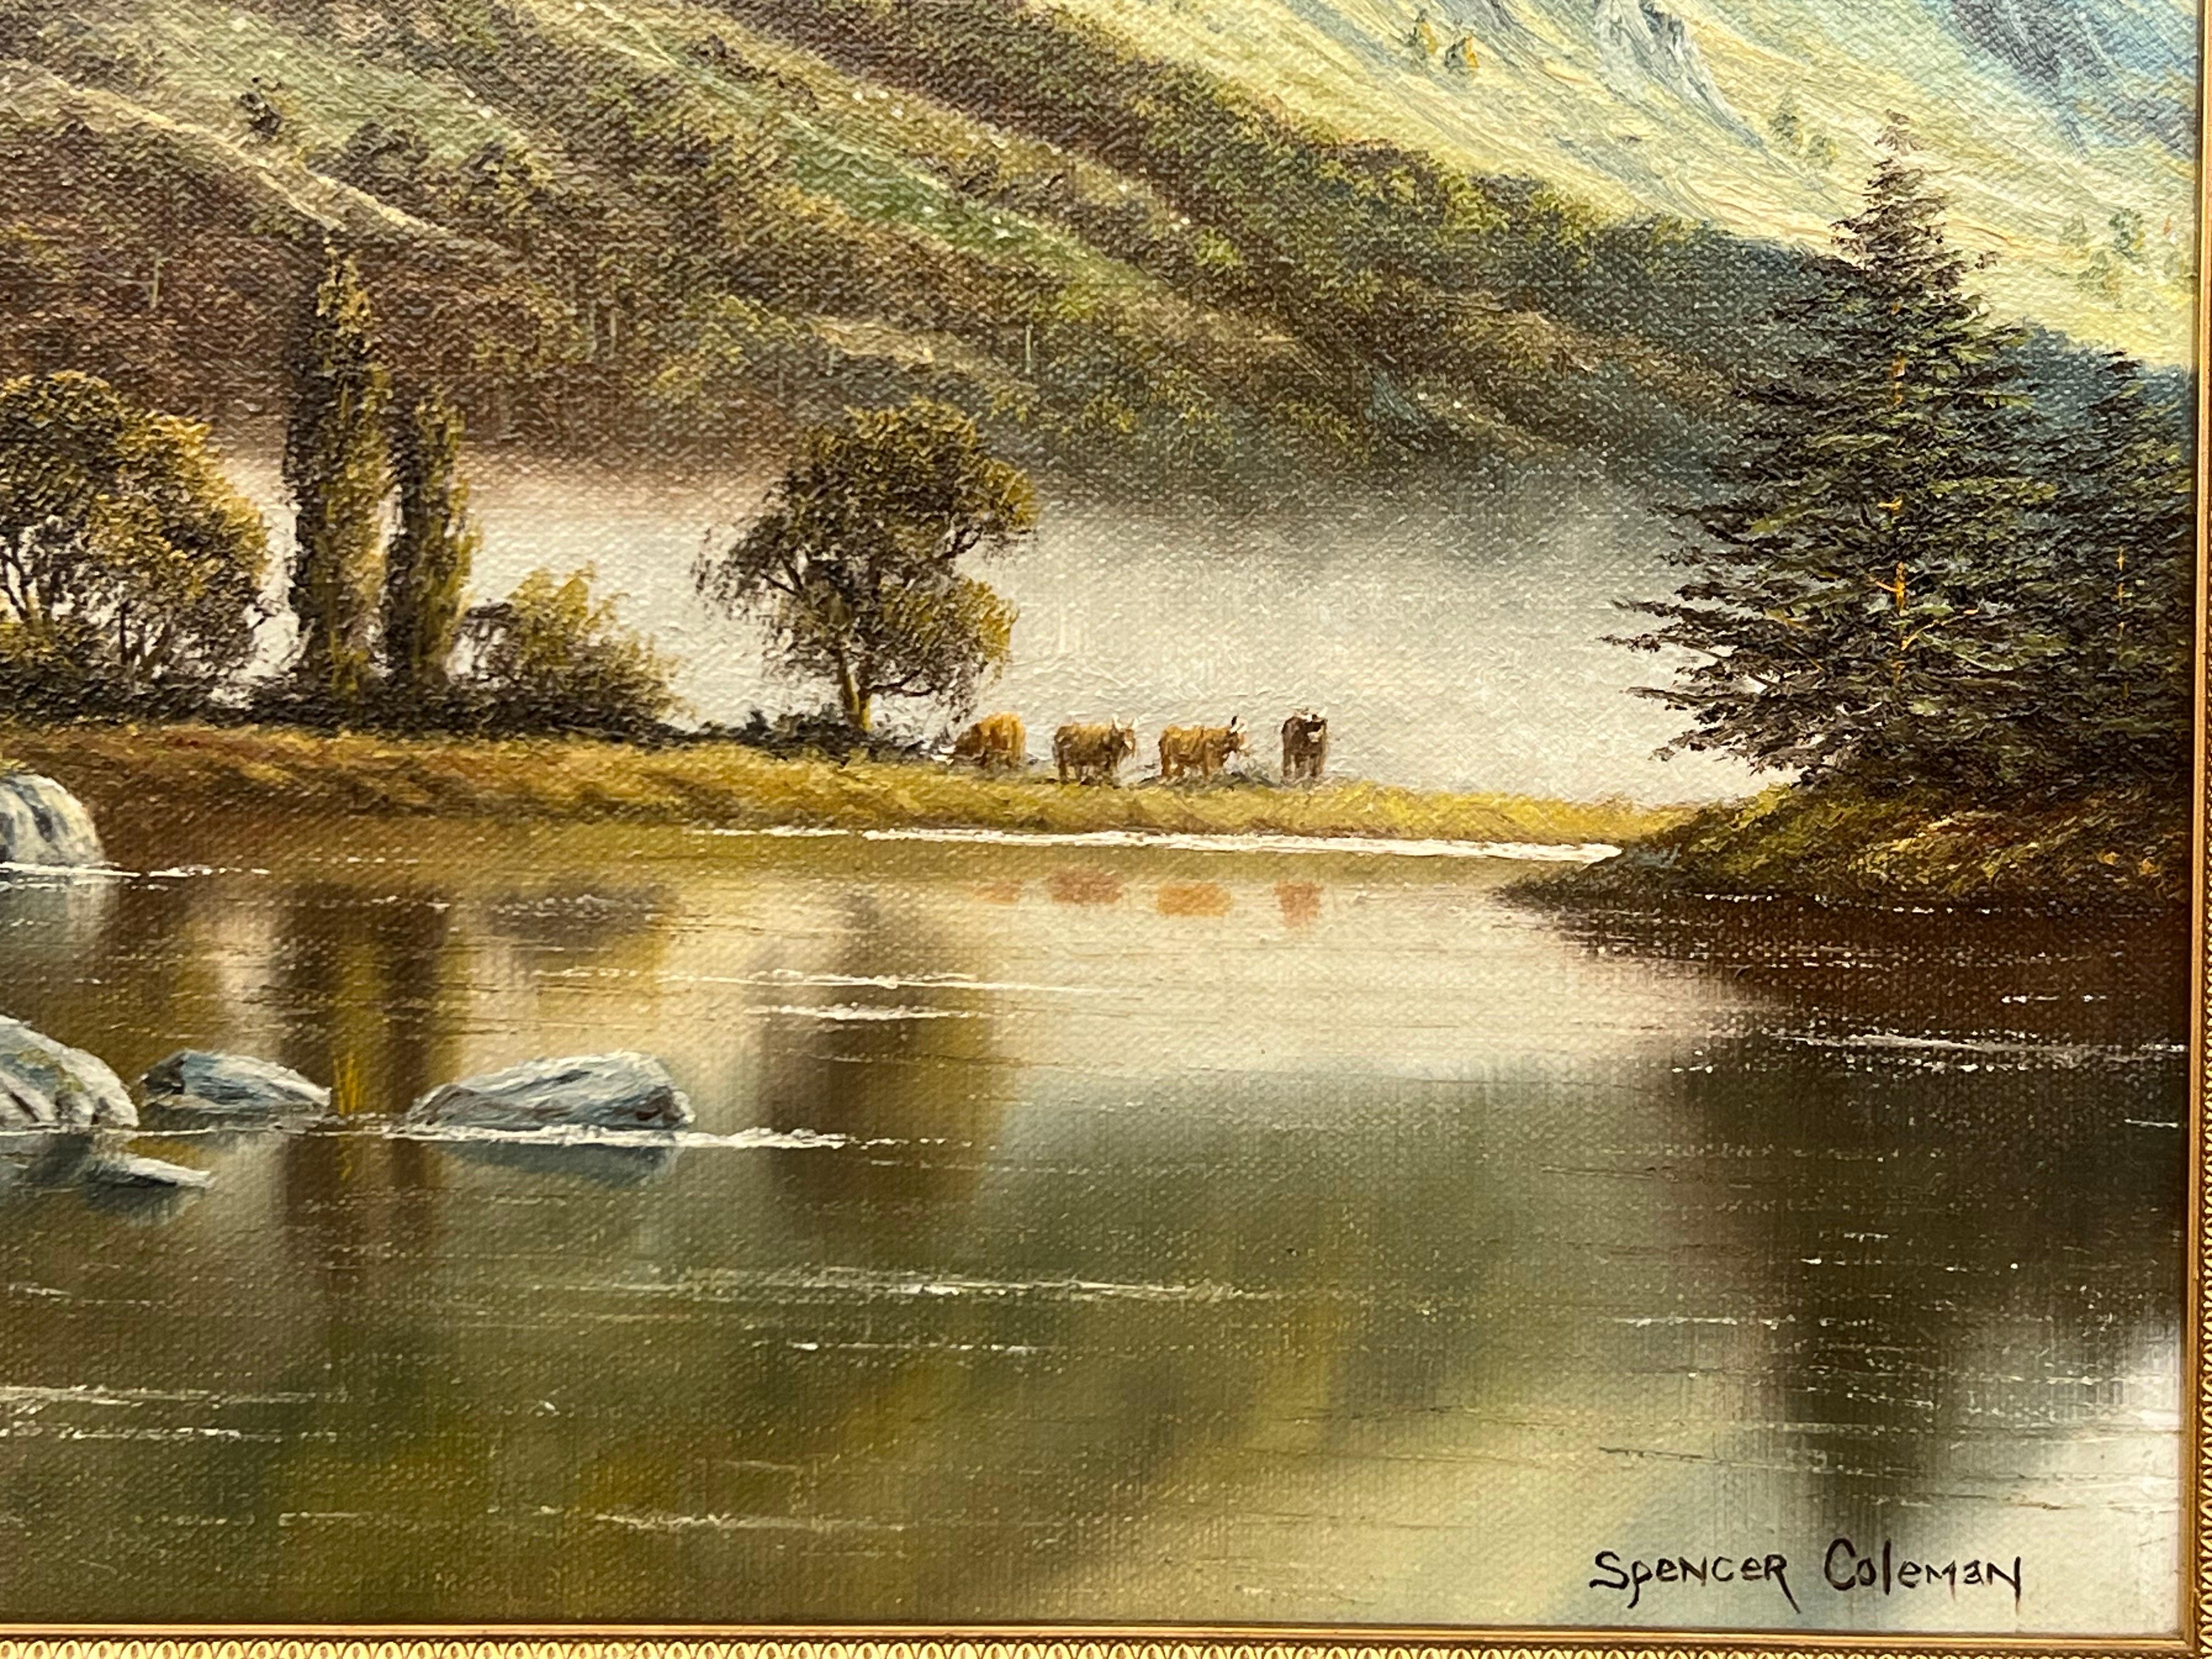 Original Oil Painting of Mountain Countryside Scene with Lake, Birds & Cattle in England. Oil on canvas, signed. 

Art measures 16 x 20 inches 
Frame measures 21 x 25 inches 

Spencer Coleman (b. 1952) is widely considered to be one of the leading